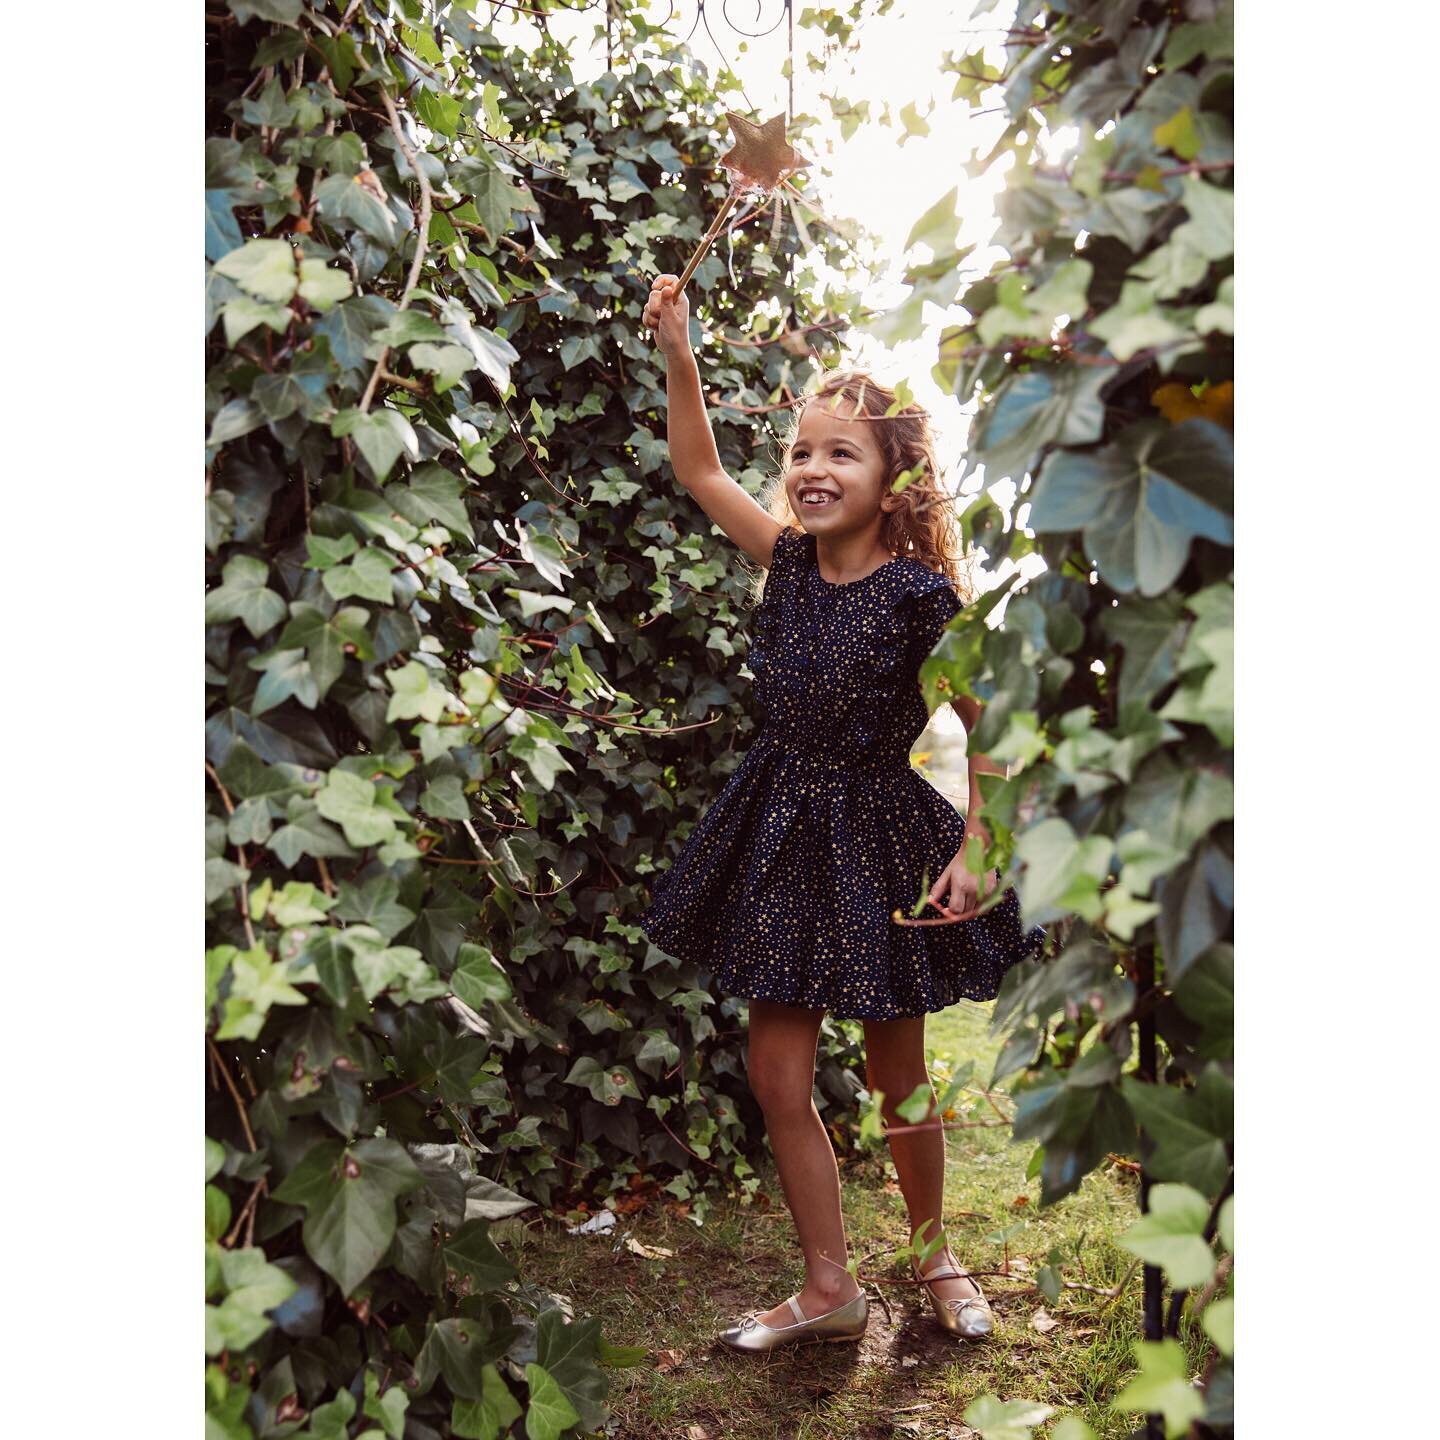 Felt like summer was back again today. ☀️ Image captured for @wishandwoderlondon one of my favourite dresses from the AW19/20 collection.
.
.
.
#kidsphotography #kidsphotoshoot #kidsphotographer #kidsfashion #childmodel #kidsstyle #coolkids #children